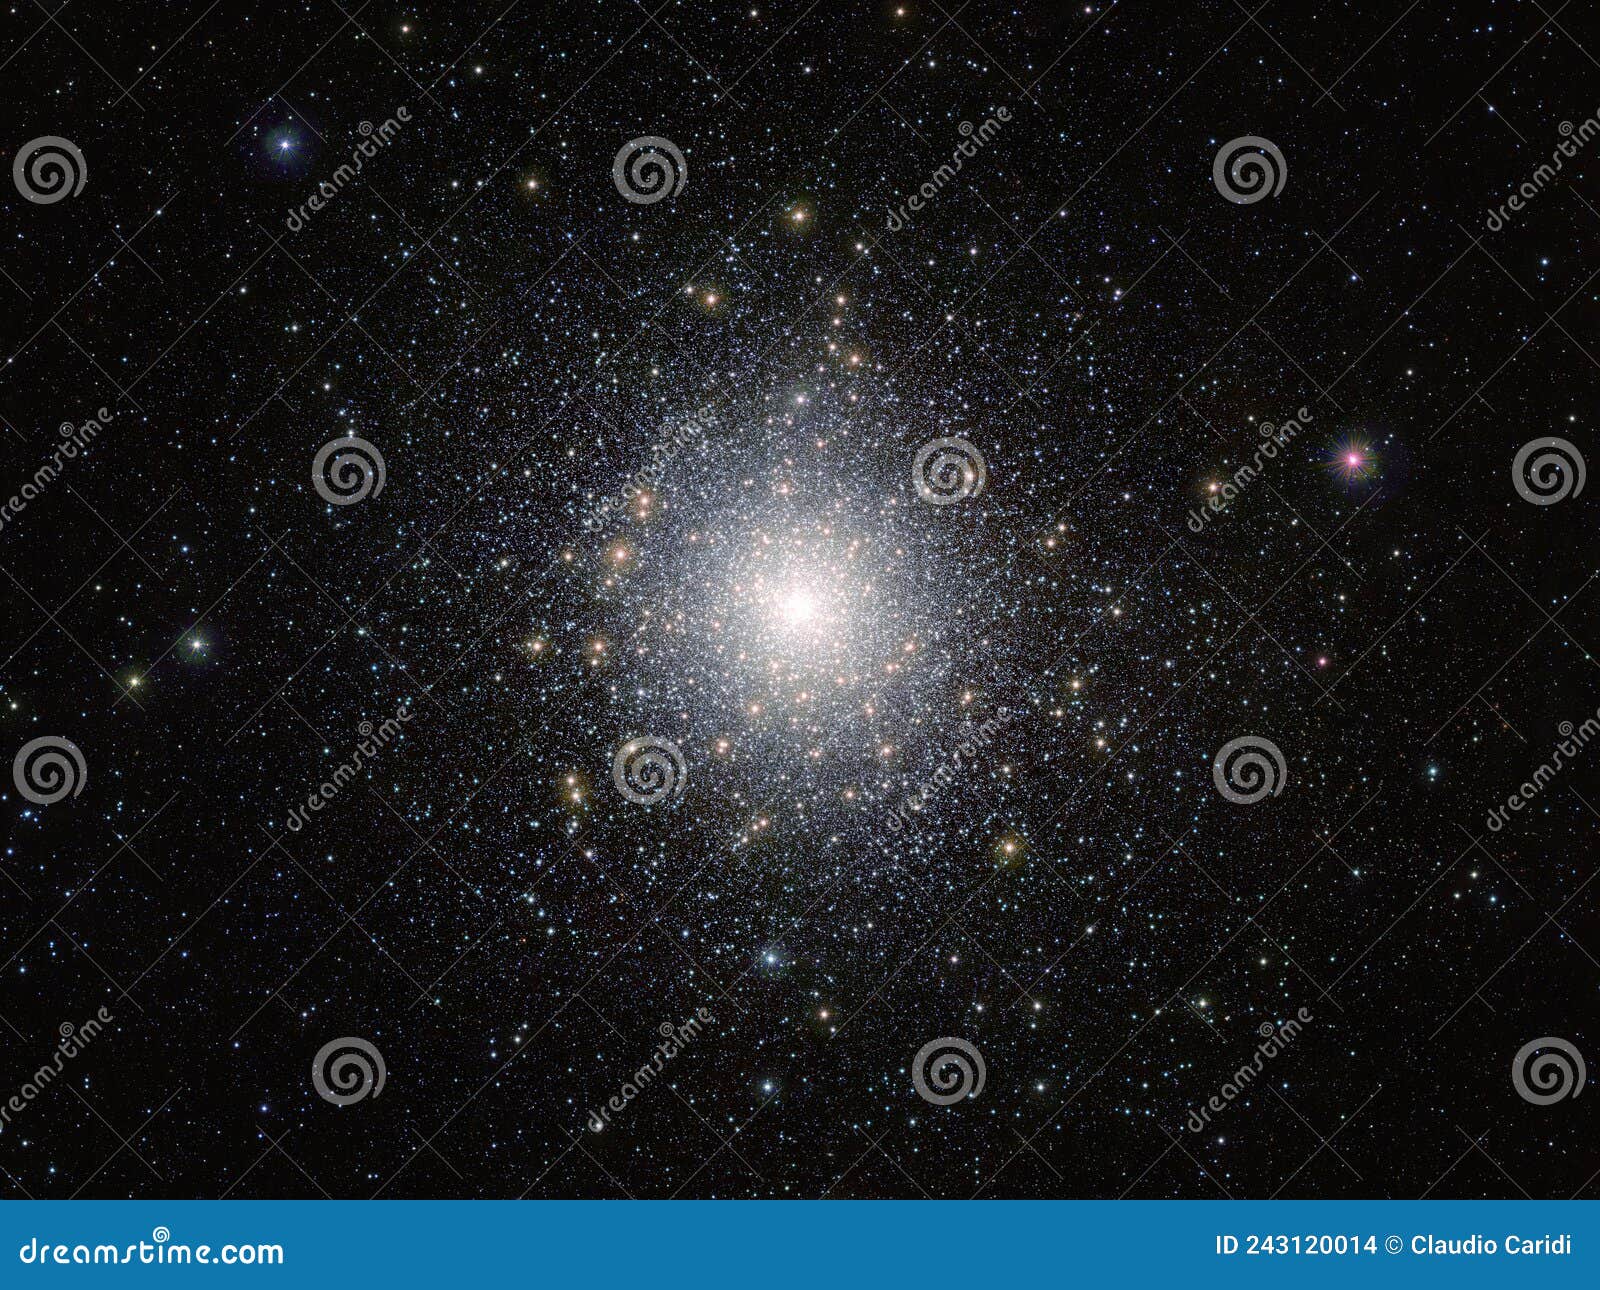 the globular star cluster 47 tucanae. s of this picture furnished by eso